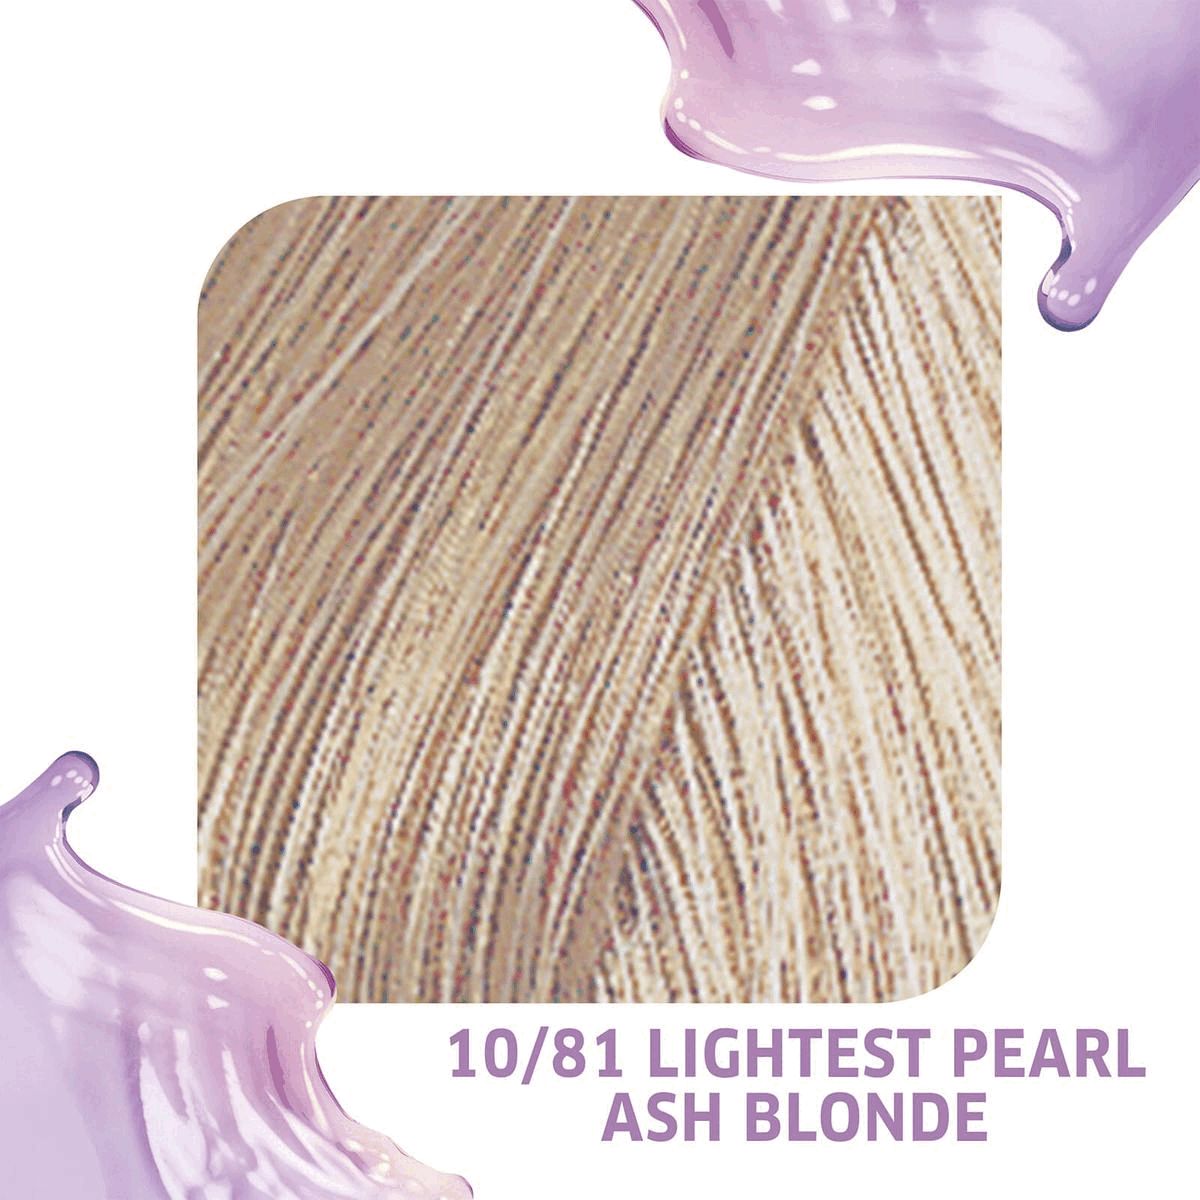 Image 1, 10/81 Lightest Pearl Ash Blonde Semi-Permenant Colour enhance. Image 2,10/81 Lightest Pearl Ash Blonde Semi-Permenant Colour enhance. Image 3, 10/81 Lightest Pearl Ash Blonde Semi-Permenant Colour enhance. Image 4, Direct Dies and Vitamin Care Complex Image 5,Lasts Up to 10 Shampoos. Image 6,Colour, depth and tone
            .